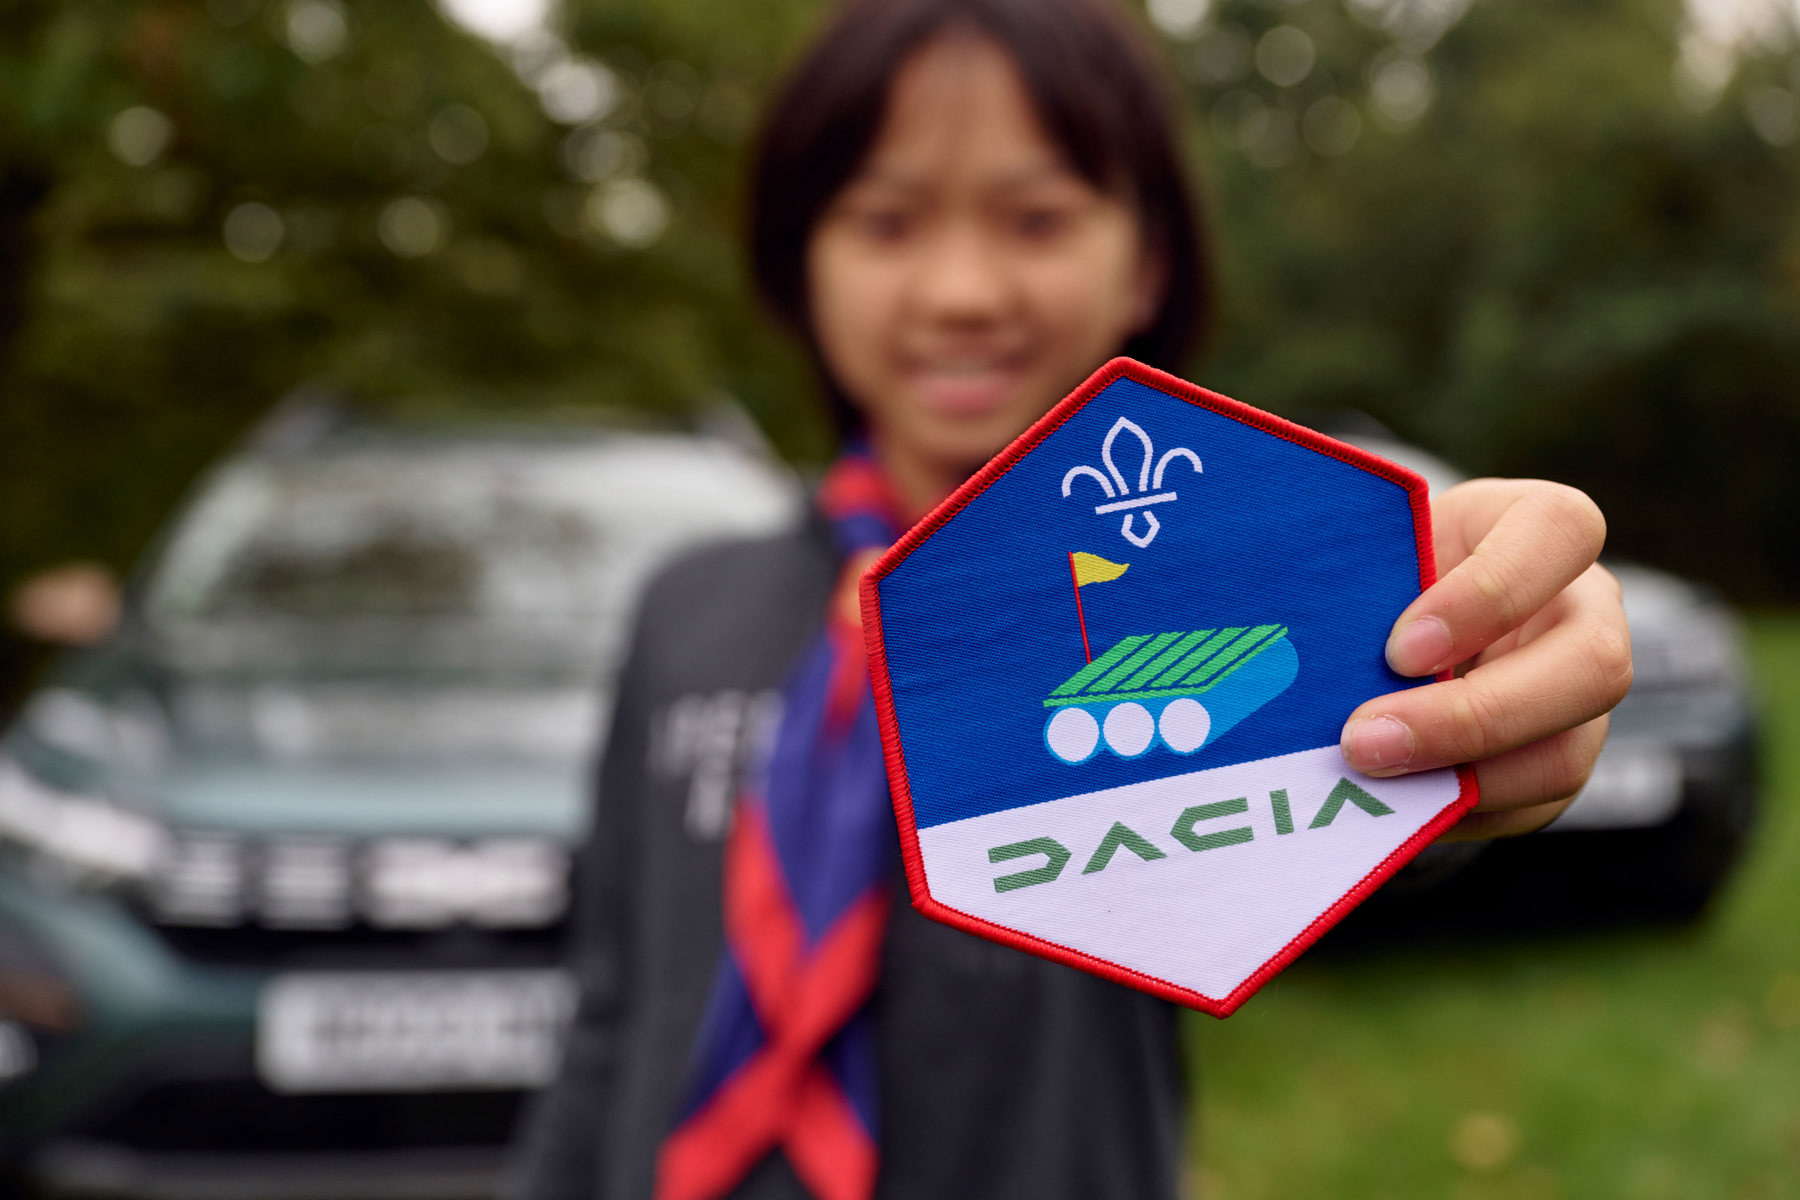 The image shows a Scout wearing a purple and red necker and stood in front of two cars. The Scout and the cars are blurred in the background, with the focus on the Dacia badge, which the Scout is holding out right in front of the camera.